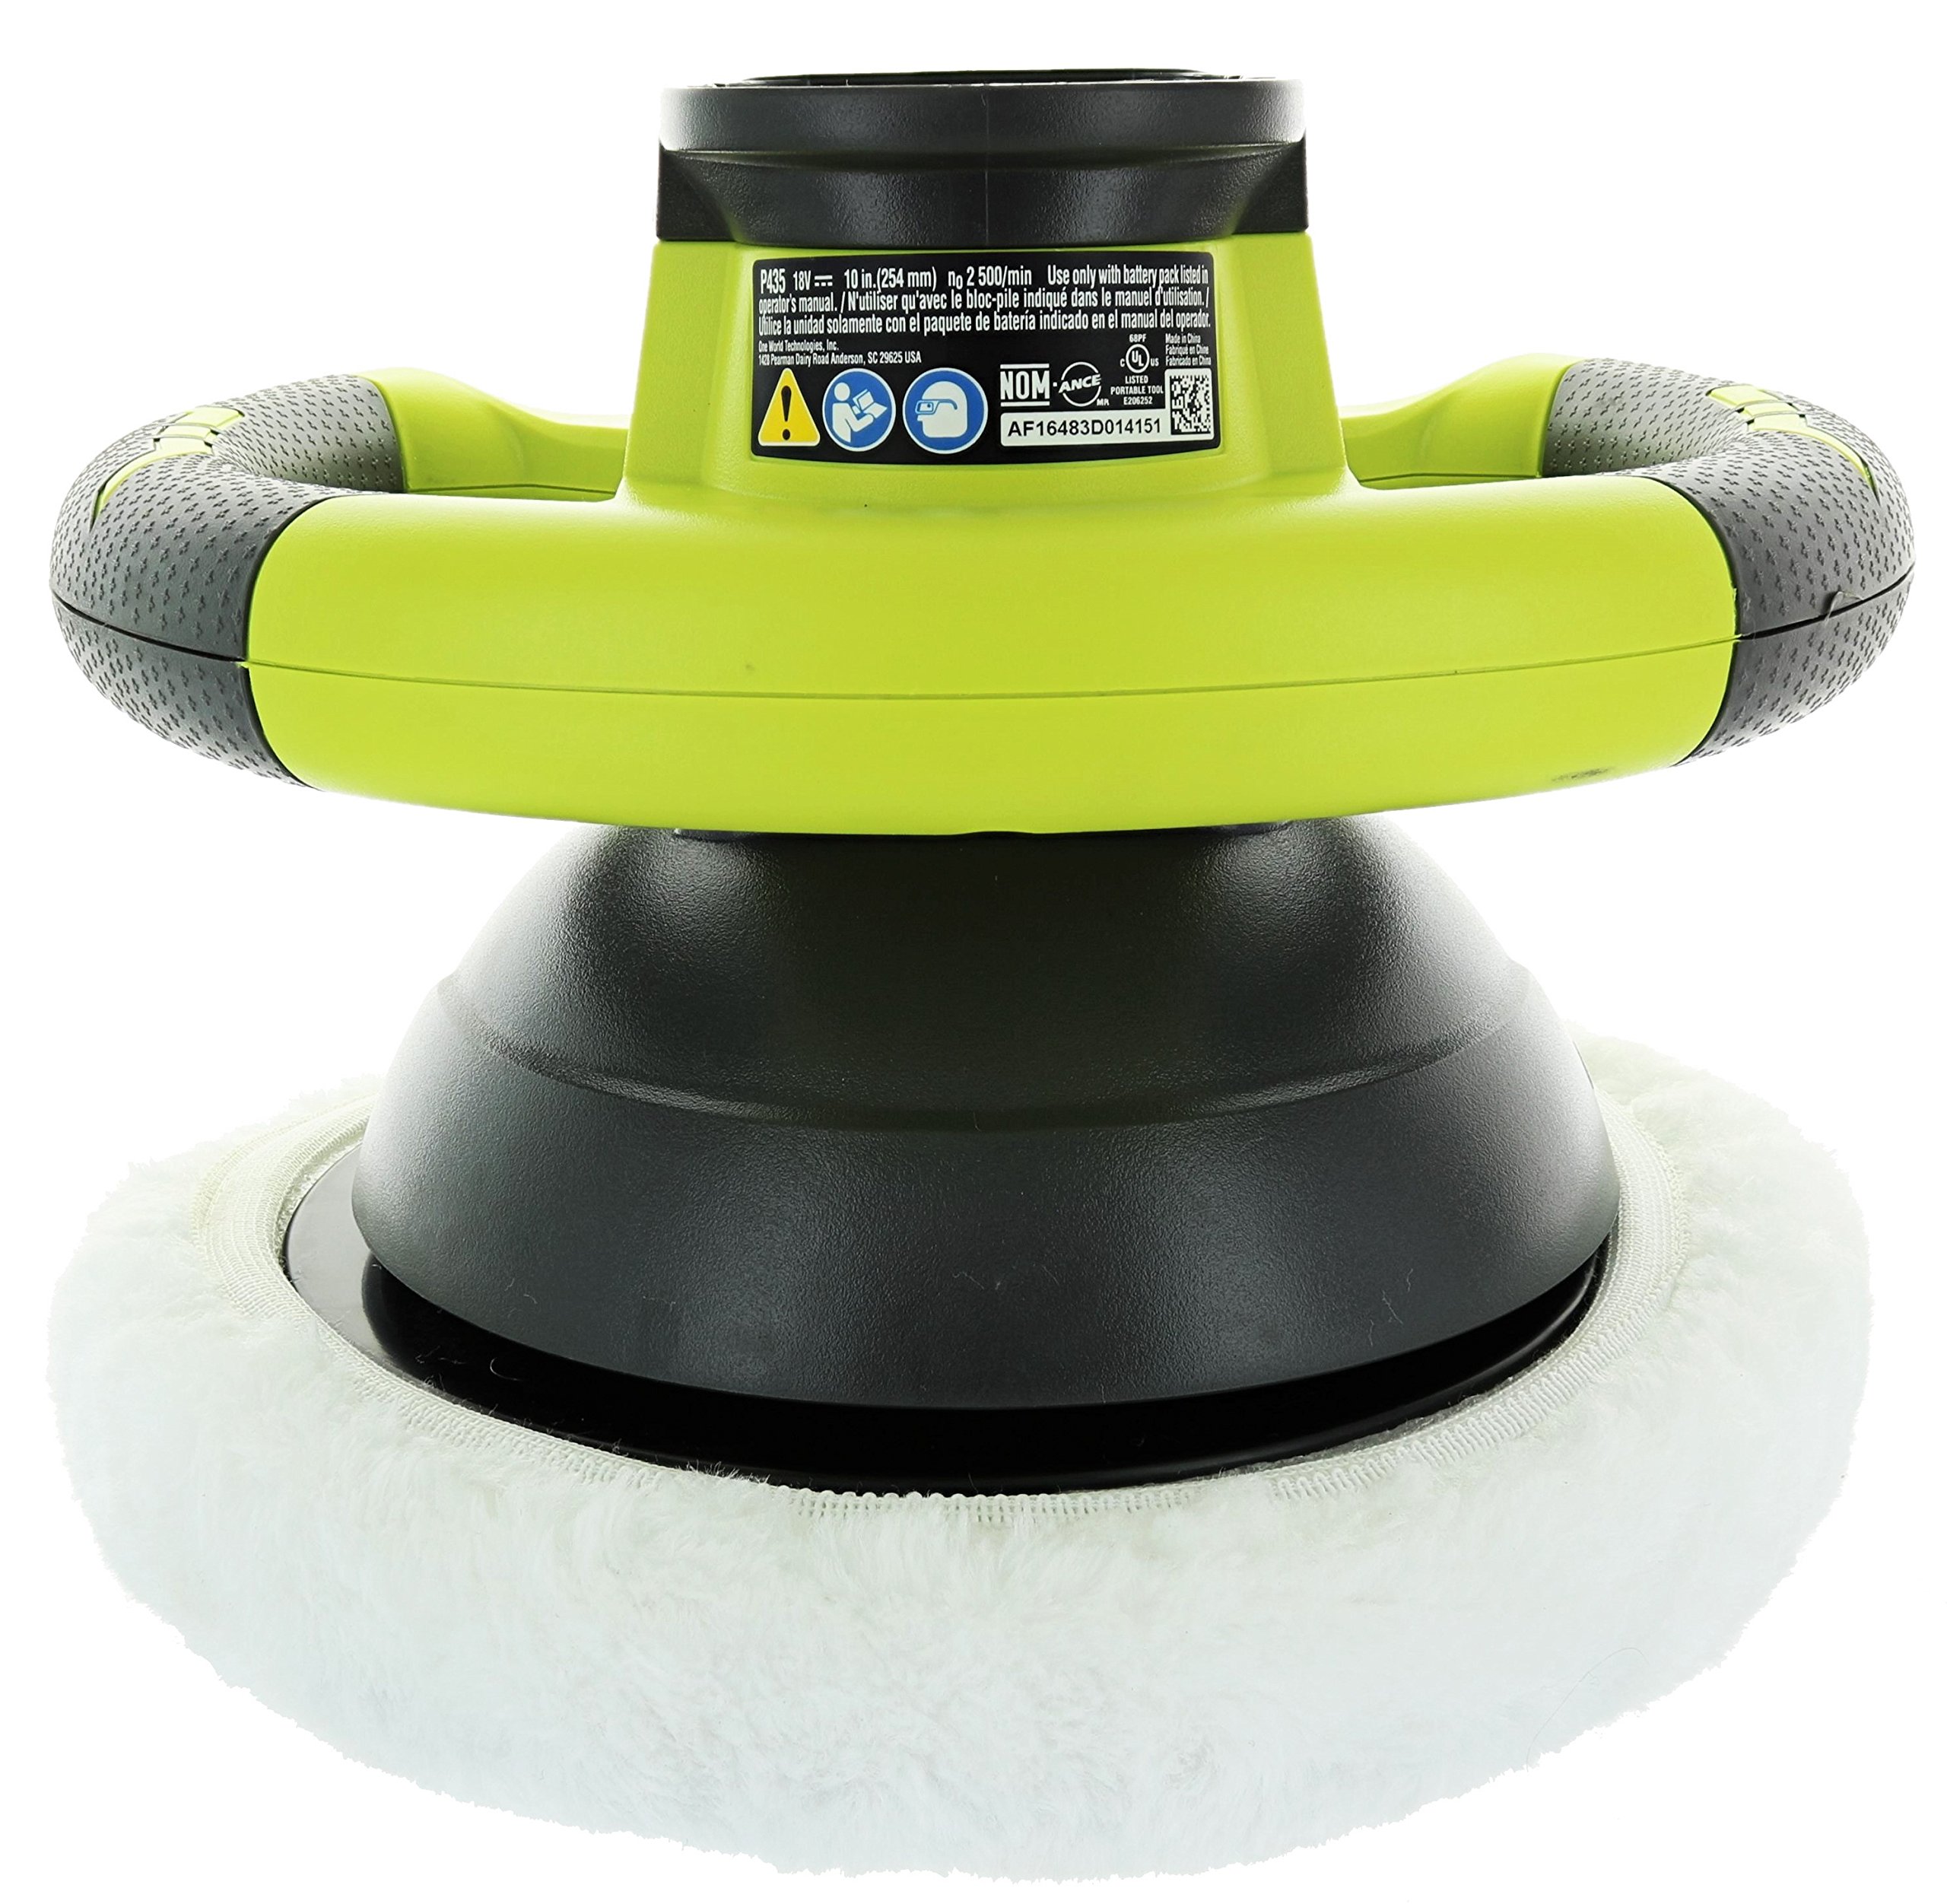 RYOBI P435 One+ 18V Lithium Ion 10" 2500 RPM Cordless Orbital Buffer/Polisher with 2 Bonnets (Battery Not Included, Power Tool Only)